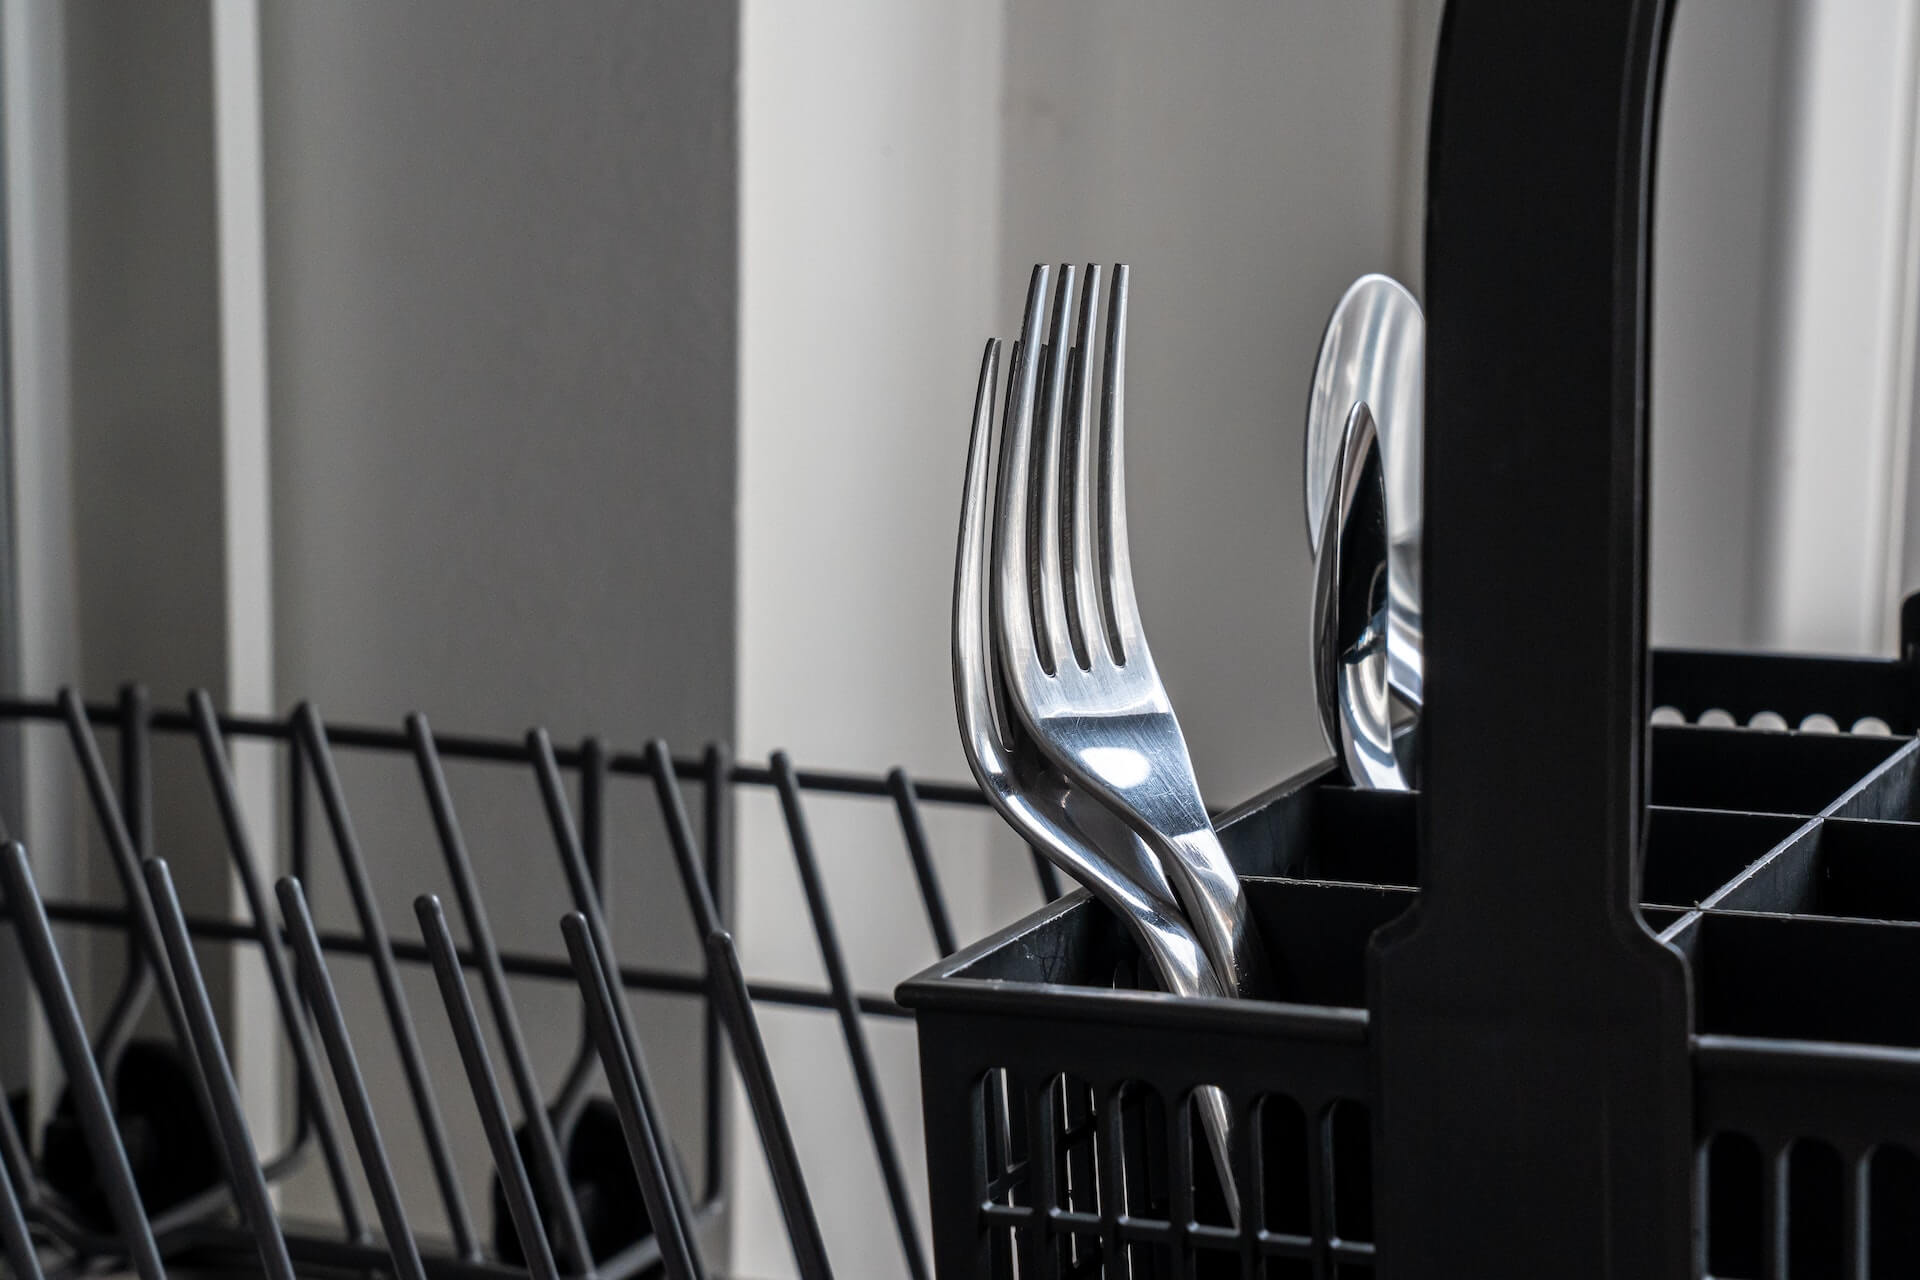 Cutlery placed inside a dishwasher